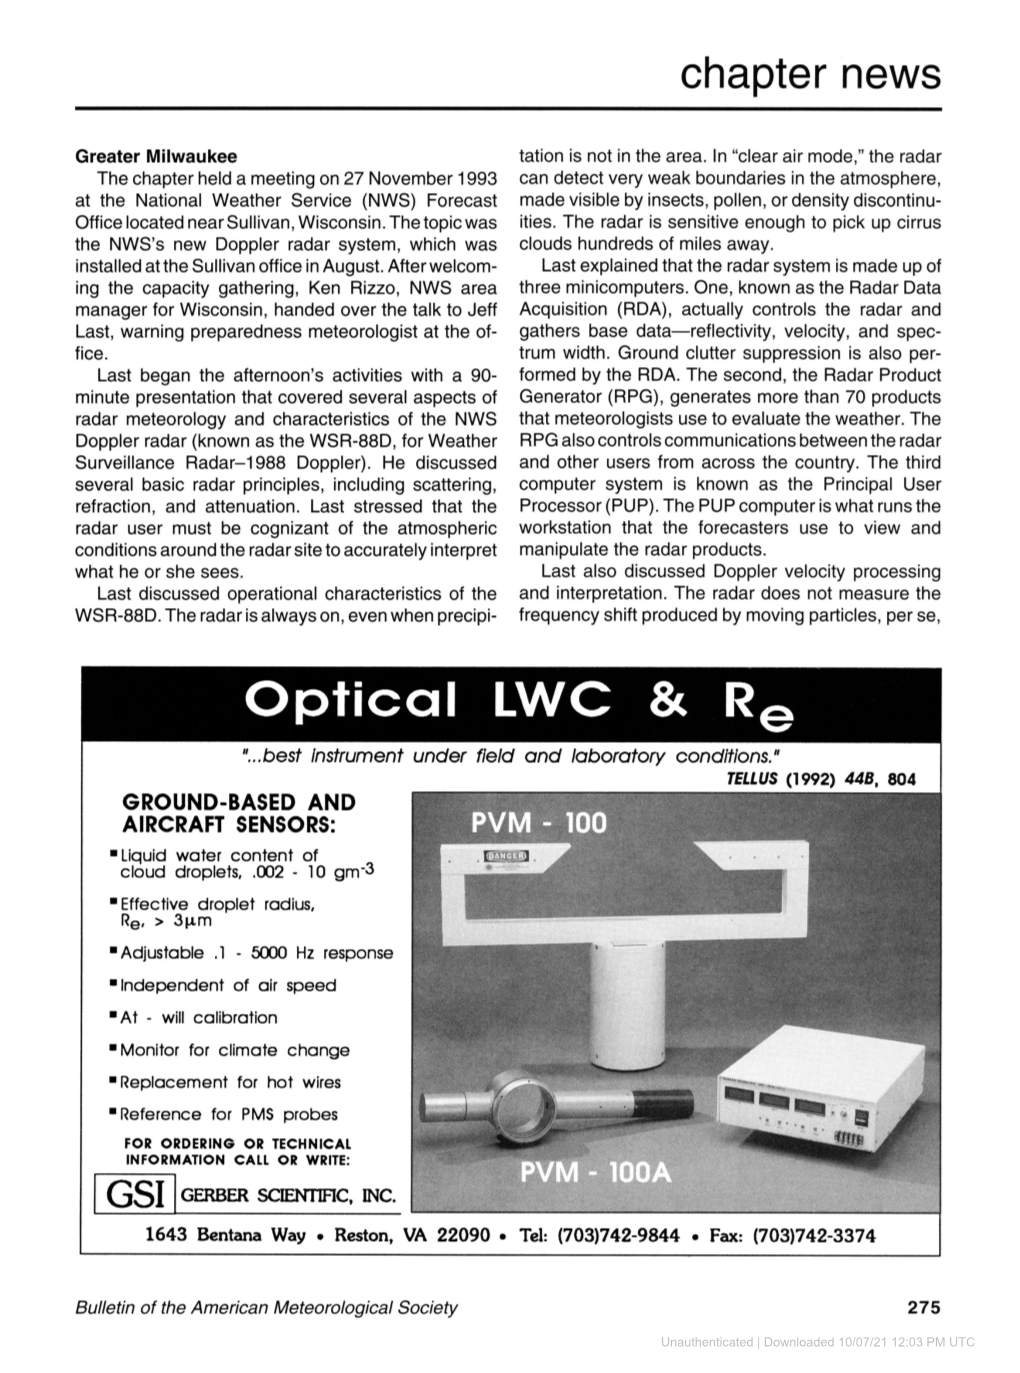 Chapter News Optical LWC & R